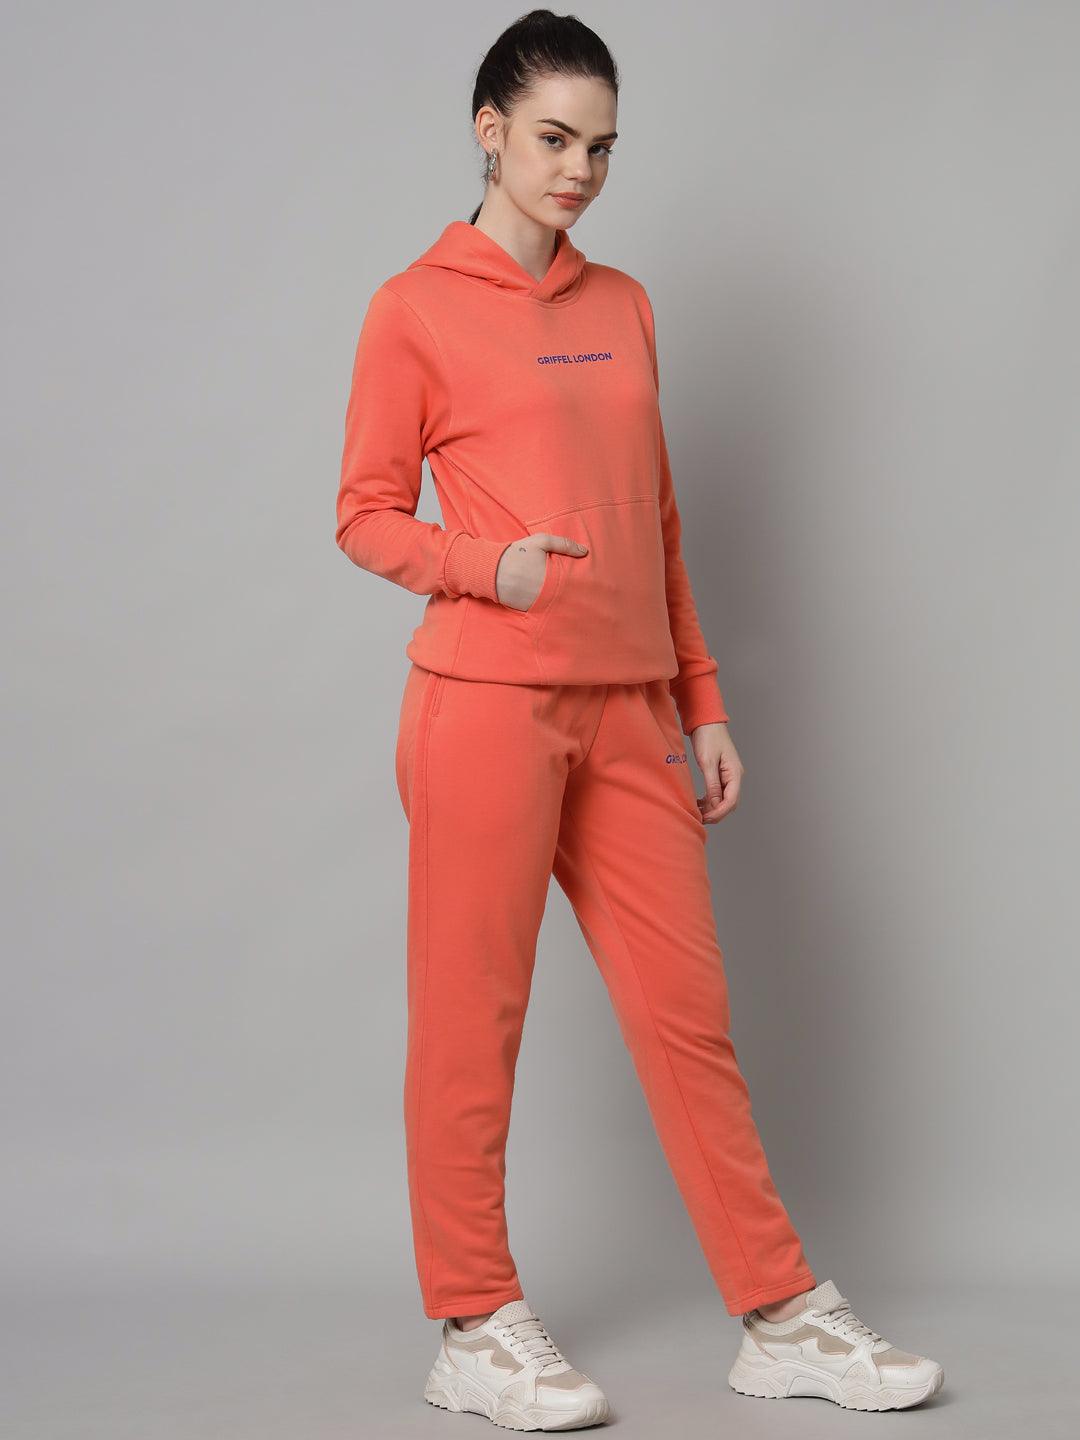 Griffel Women Solid Fleece Basic Hoodie and Joggers Full set Peach Tracksuit - griffel